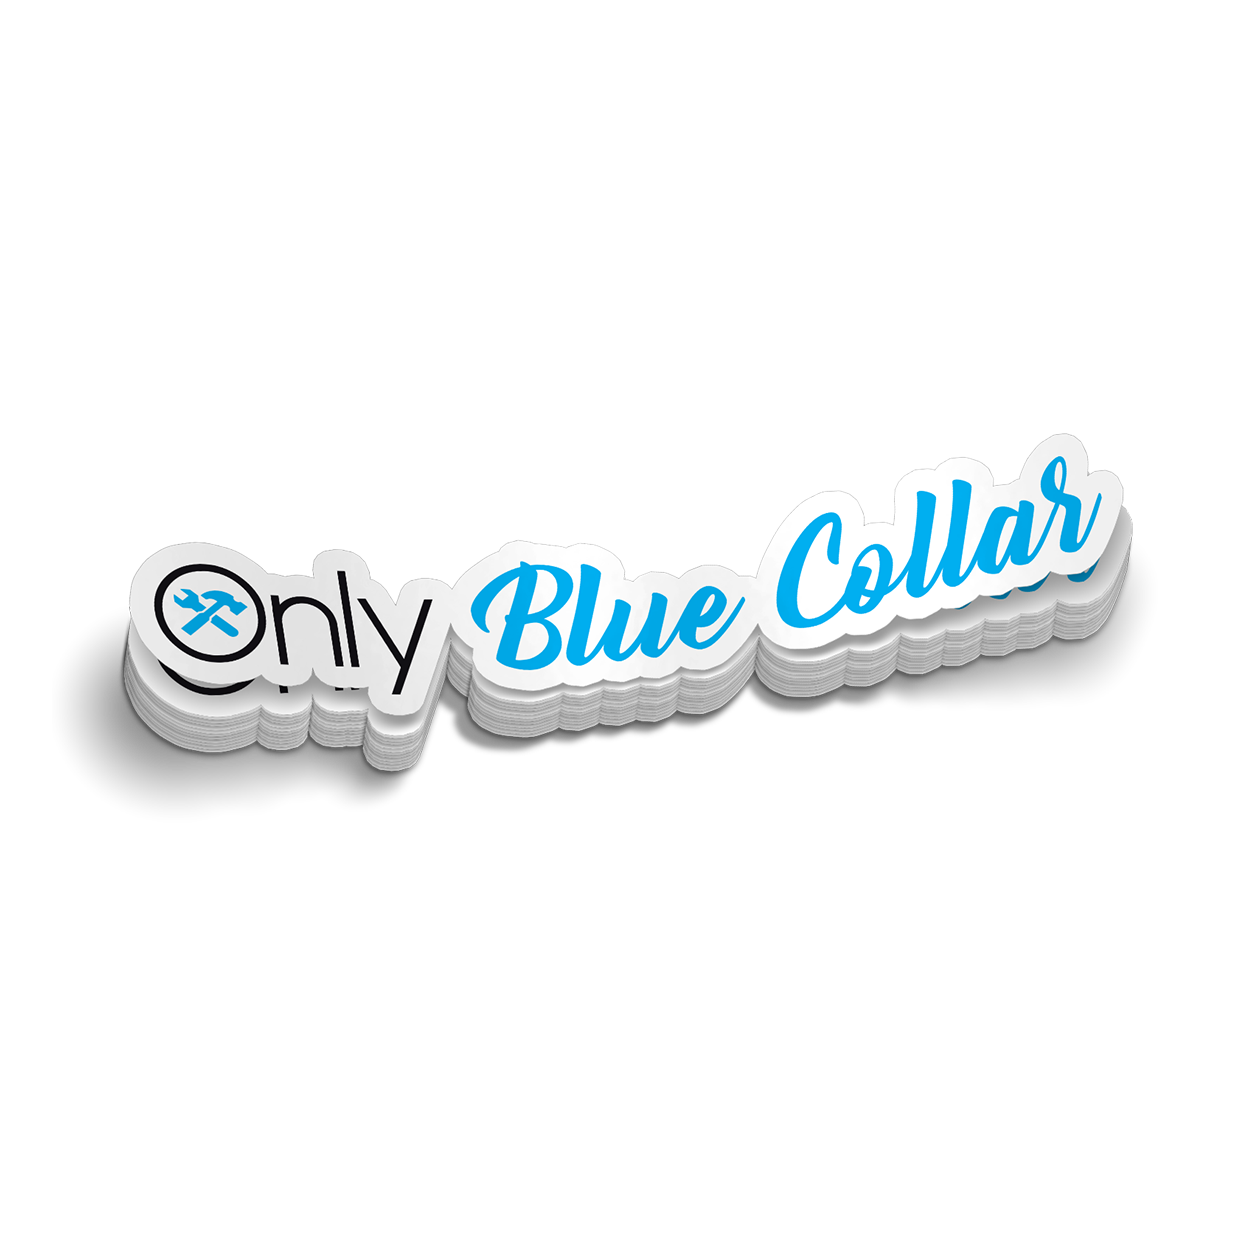 Blue Collar Working Class Stickers Funny Helmet Skull Stickers Waterproof  Vinyl Stickers, Blue Collar Stickers for Hard Hat, Toolboxes, Helmet